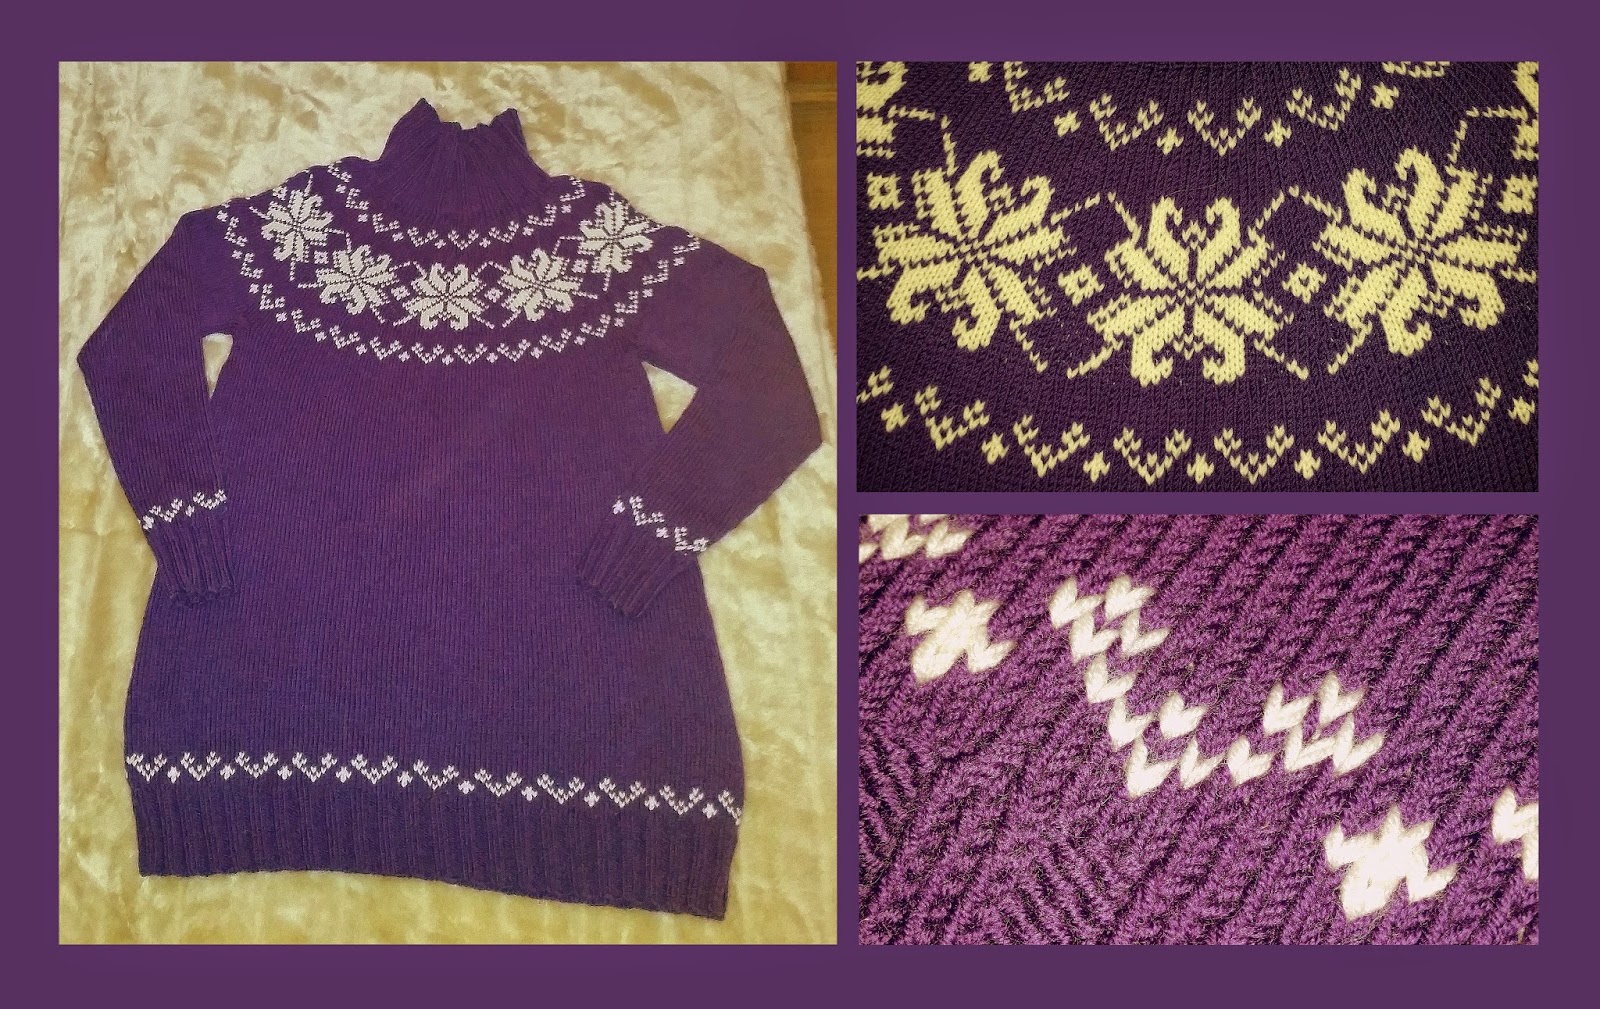 Lizzy Knits - Day by day!: Purple fair-isle sweater finished!